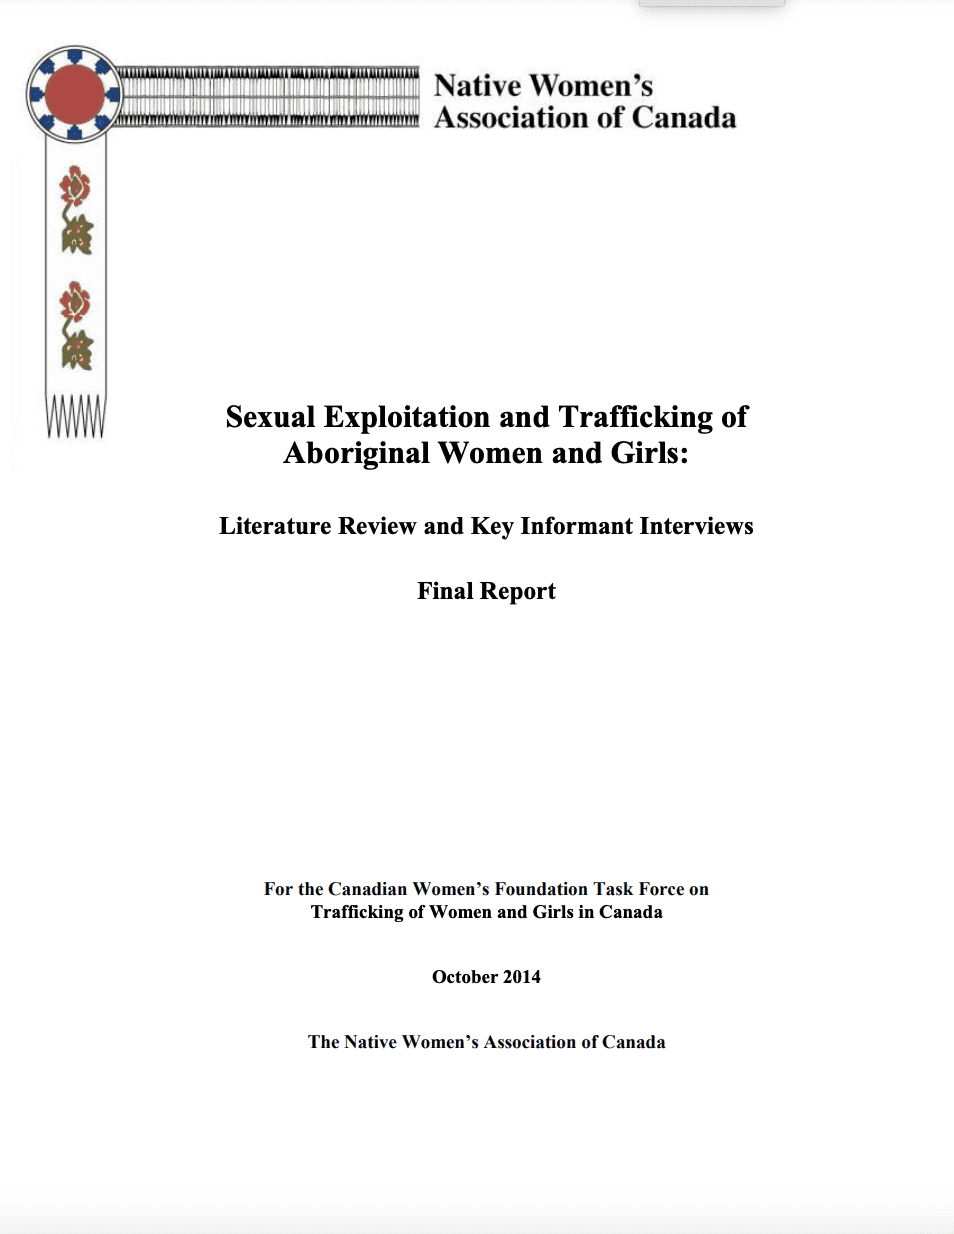 Sexual Exploitation and Trafficking of Aboriginal Women and Girls: Literature Review and Key Informant Interviews, Final Report